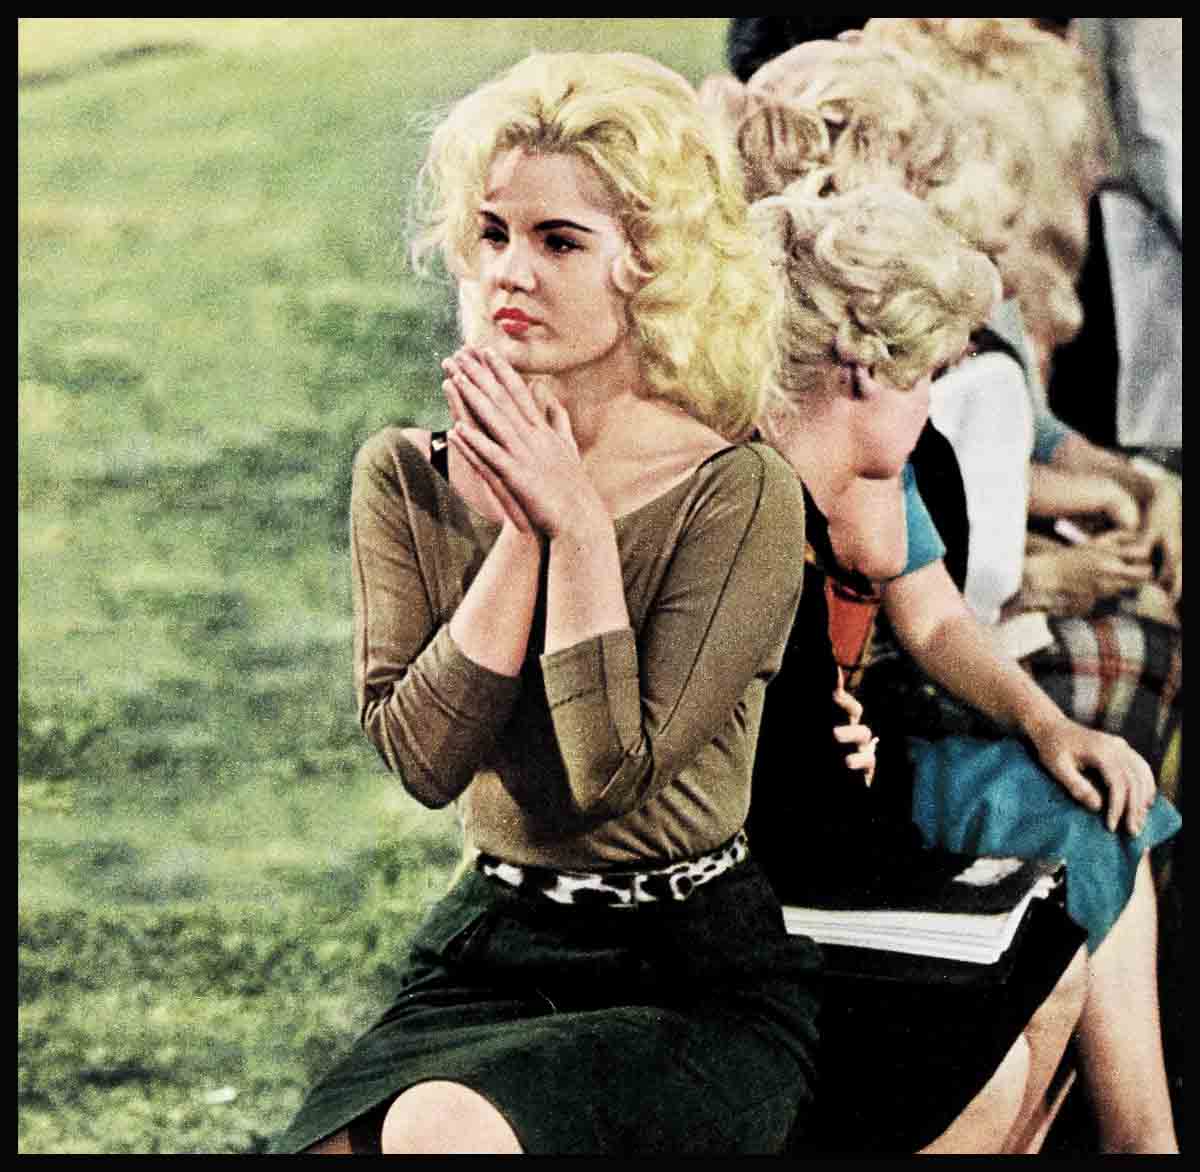 Tuesday Weld: “For Years, The Kids Wouldn't Let Me Be Friends